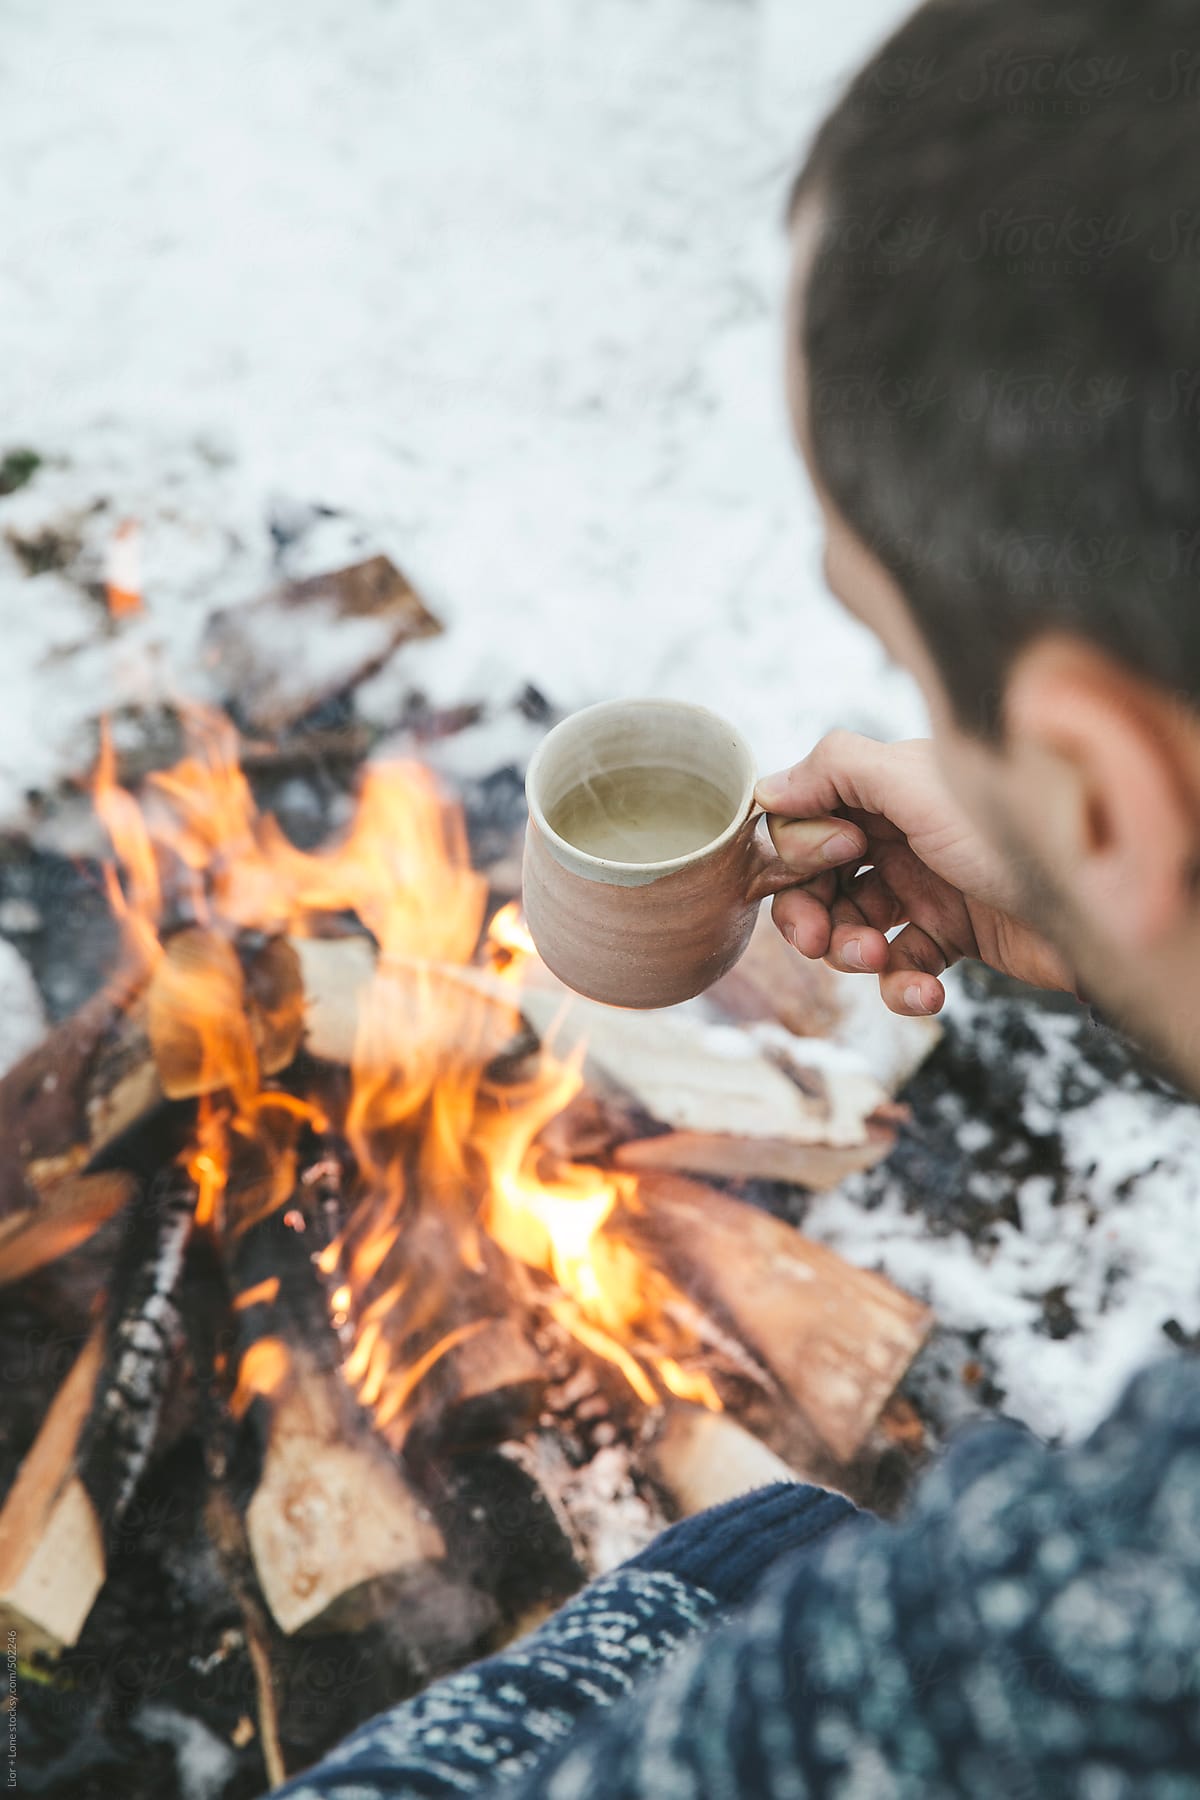 Man holding a cup of hot tea next to bonfire in the snow